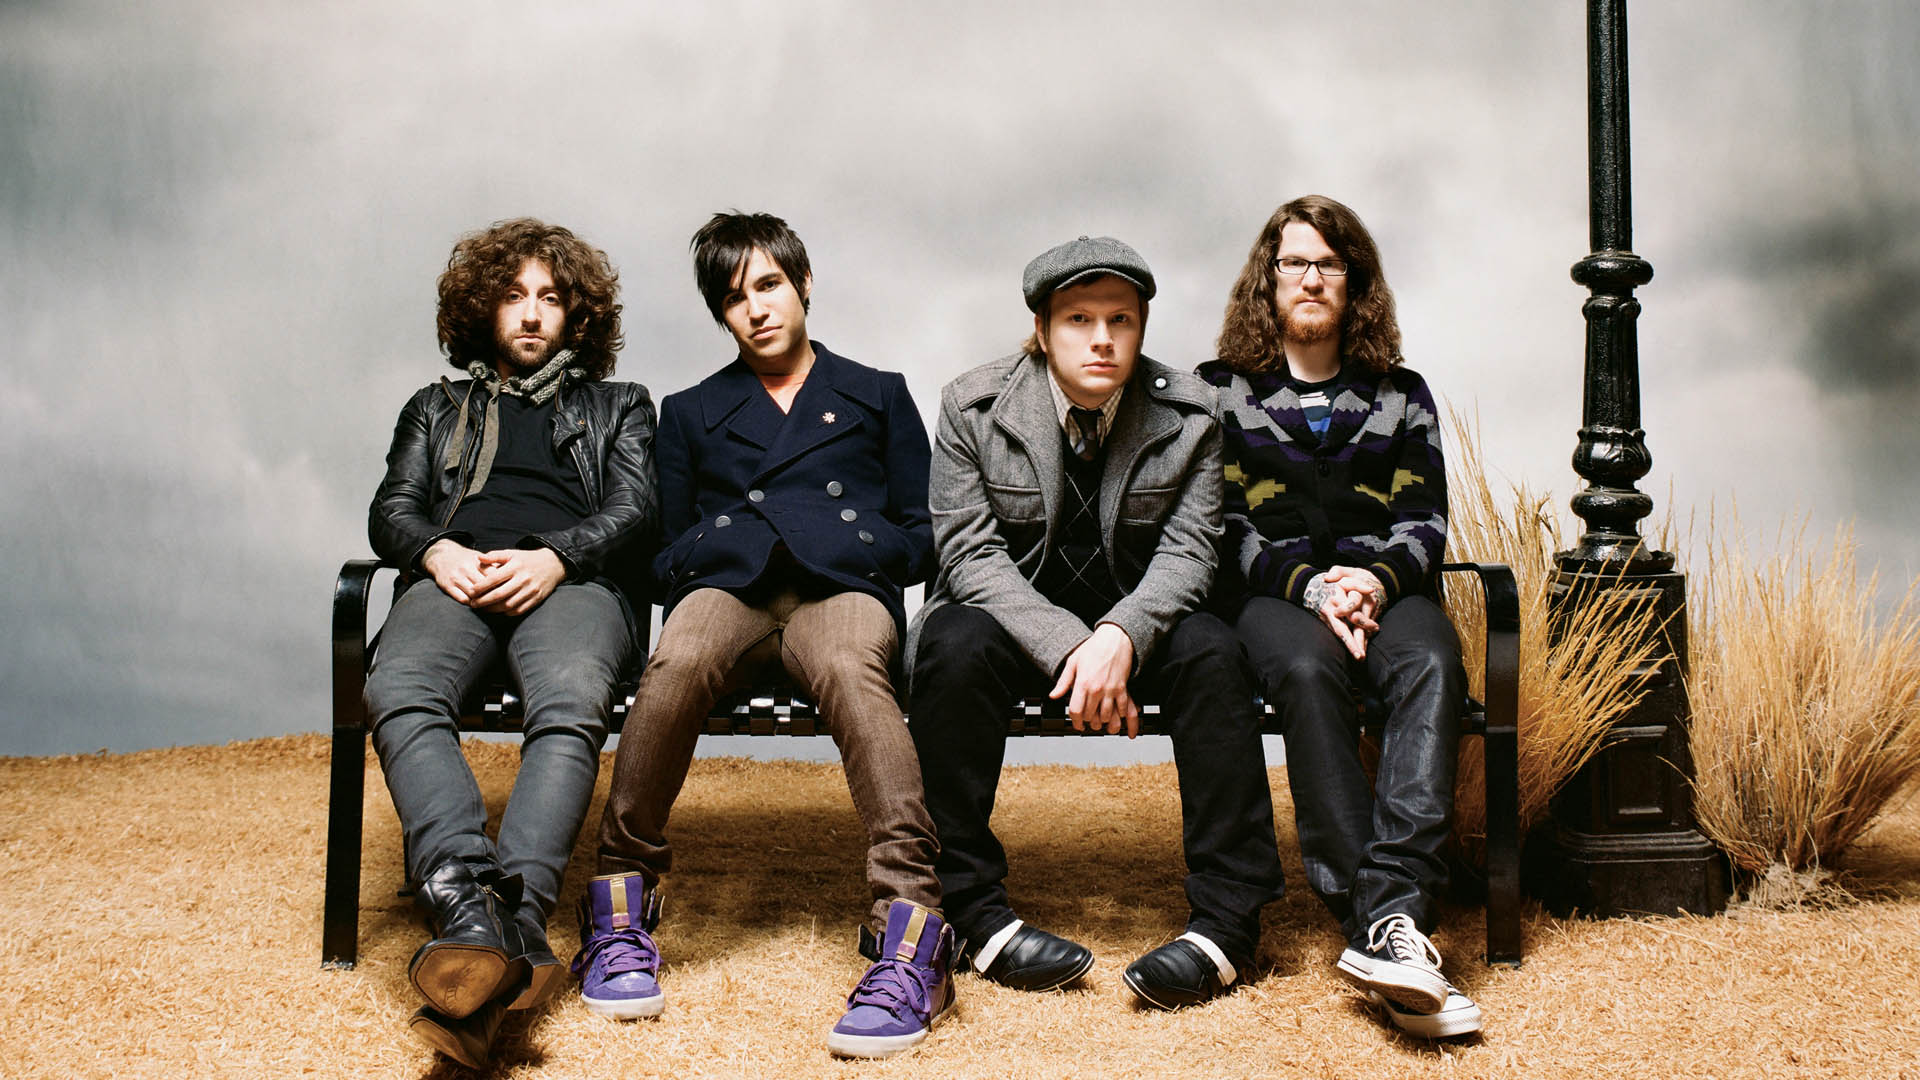 Fall Out Boy Wallpaper HD - Apps on Google Play